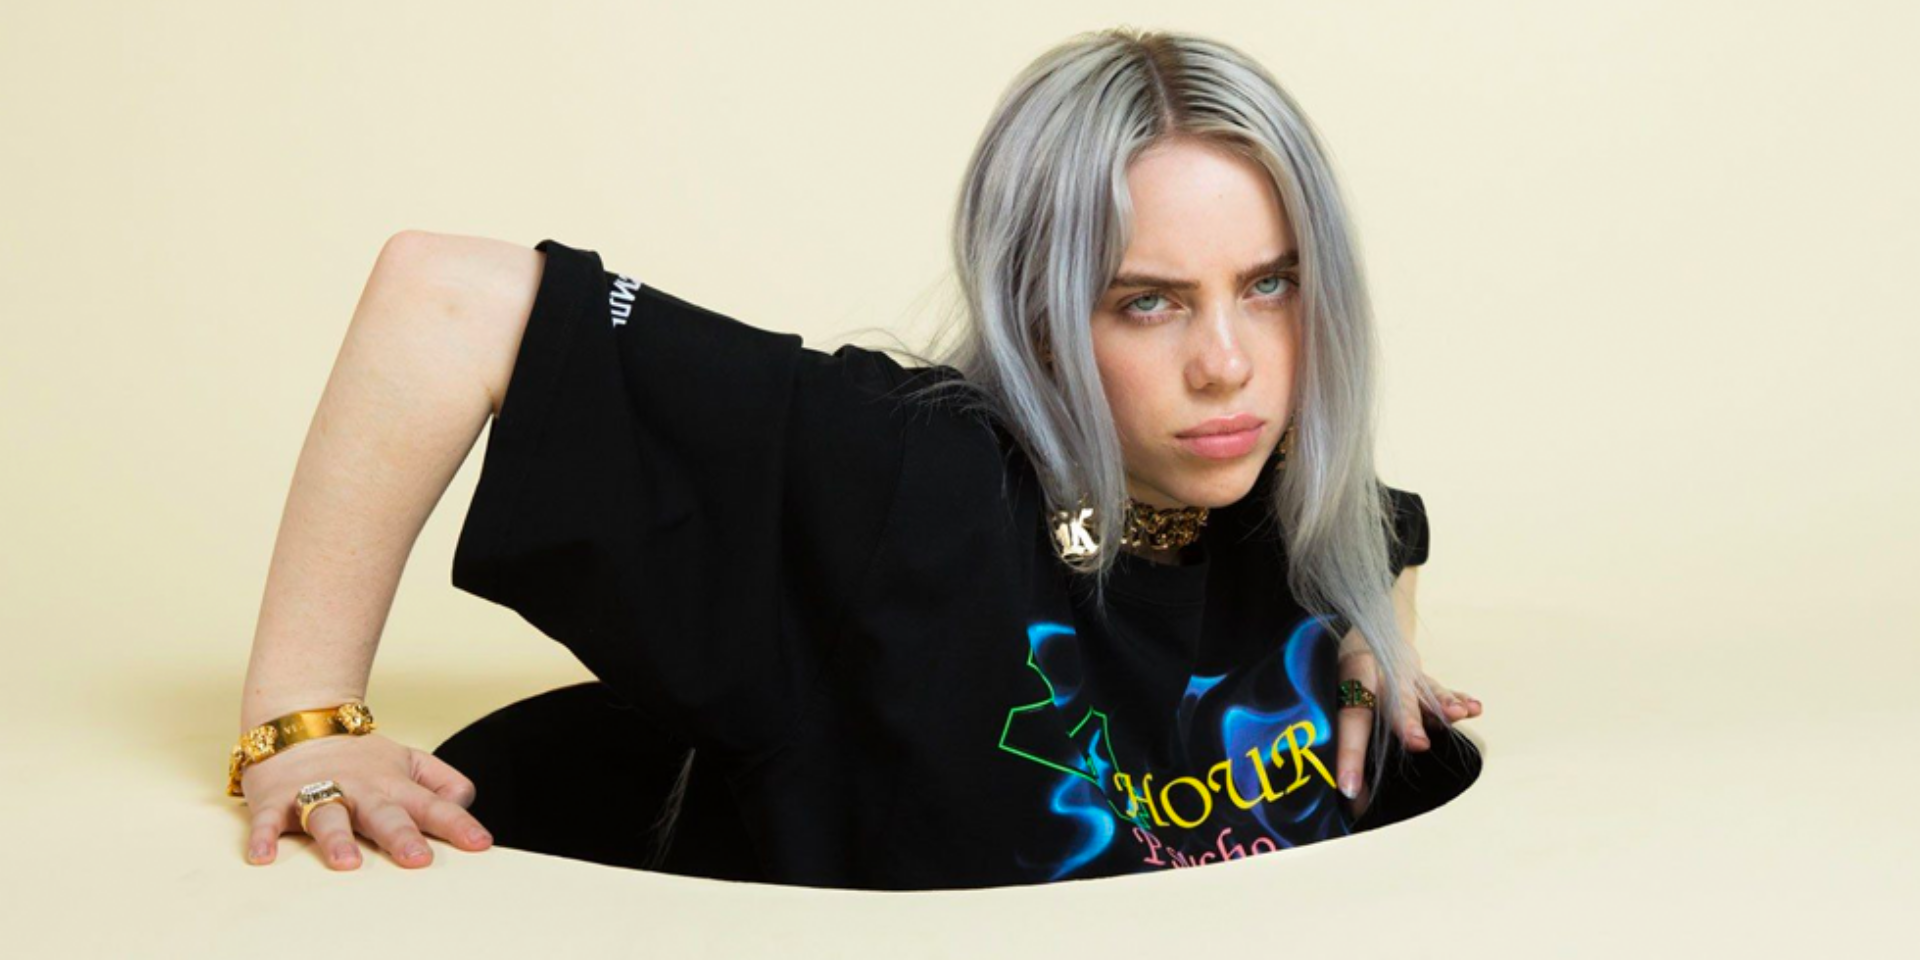 Billie Eilish ends 'Old Town Road''s historic run on the Billboard Hot 100 chart